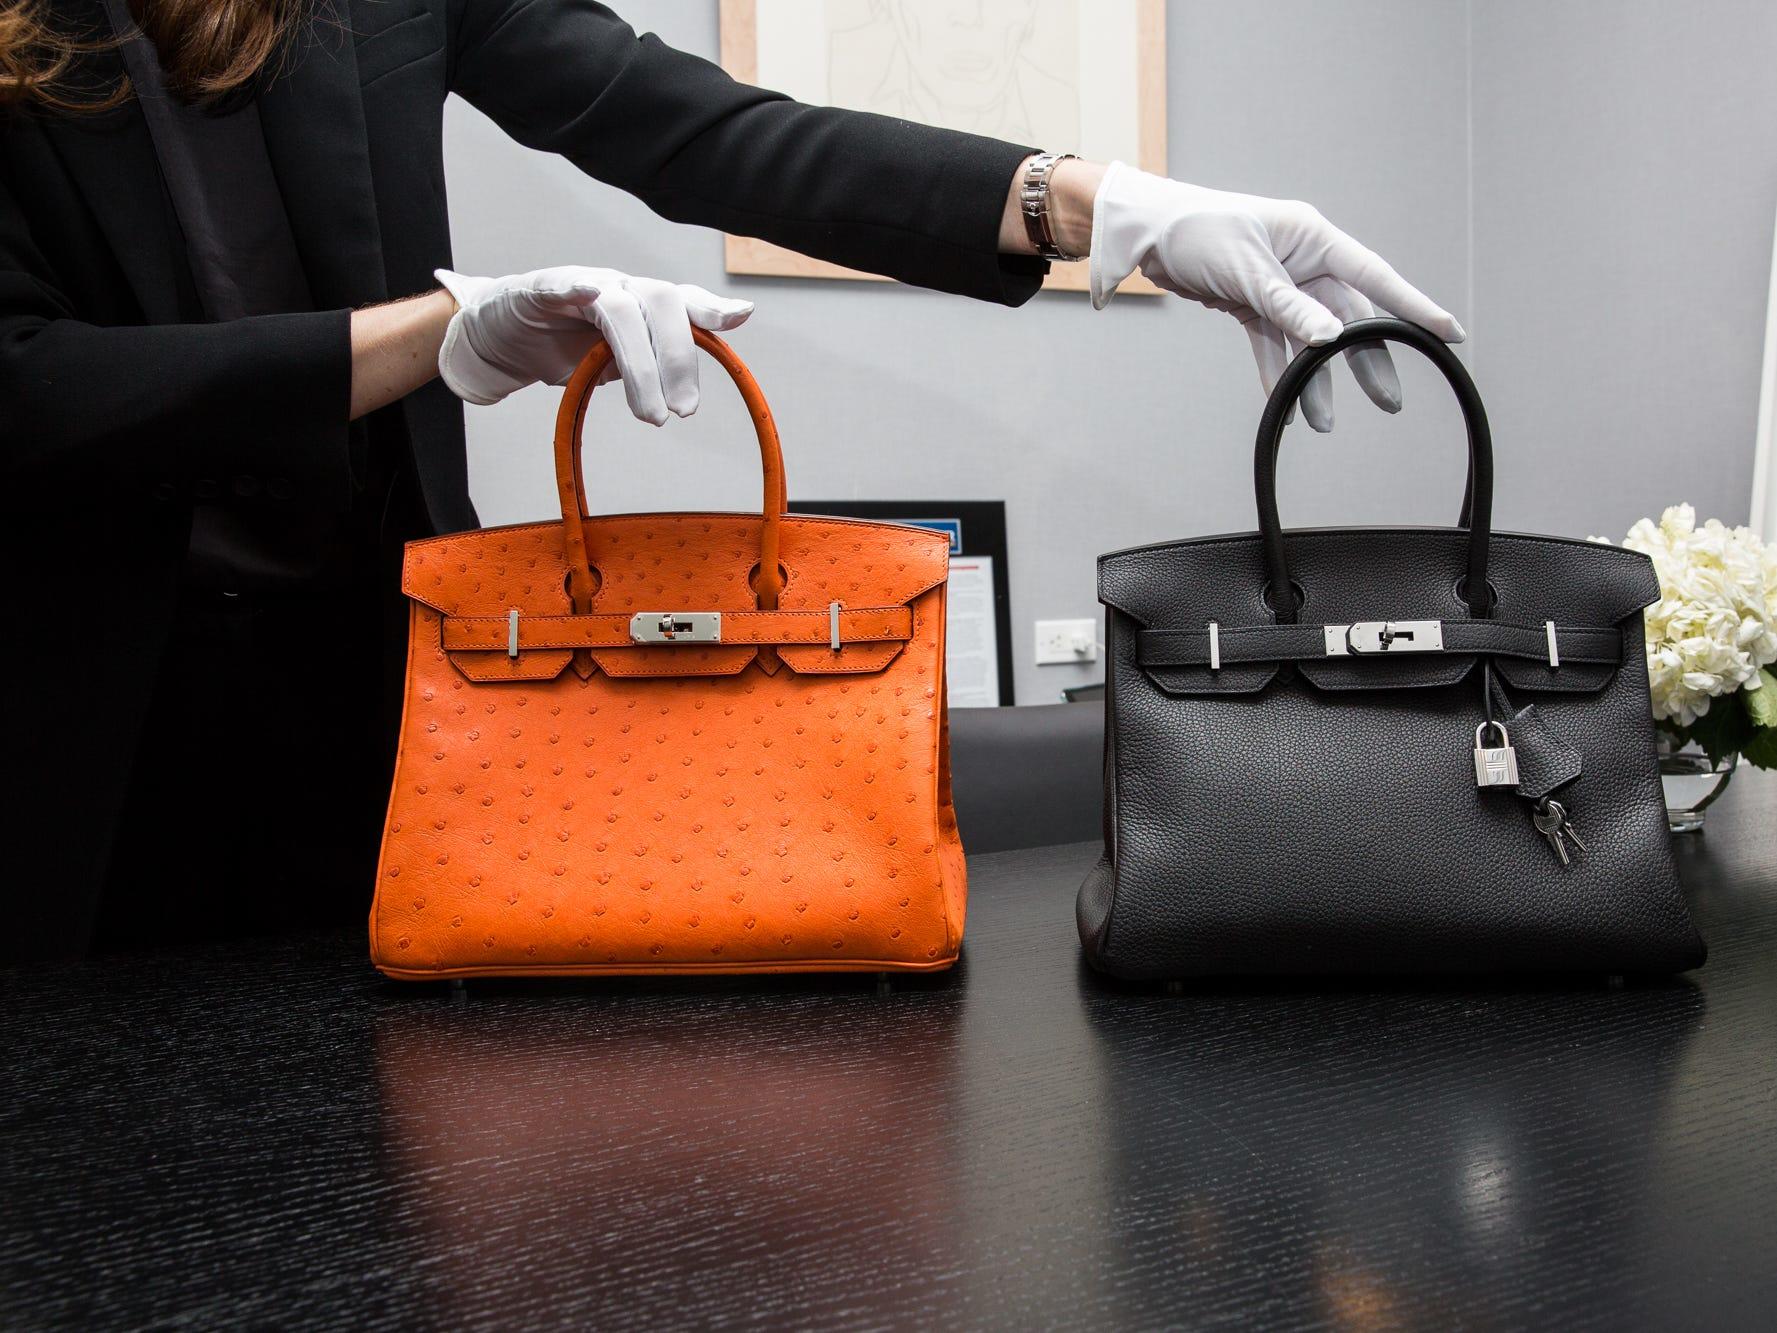 5 of the most expensive handbags ever 